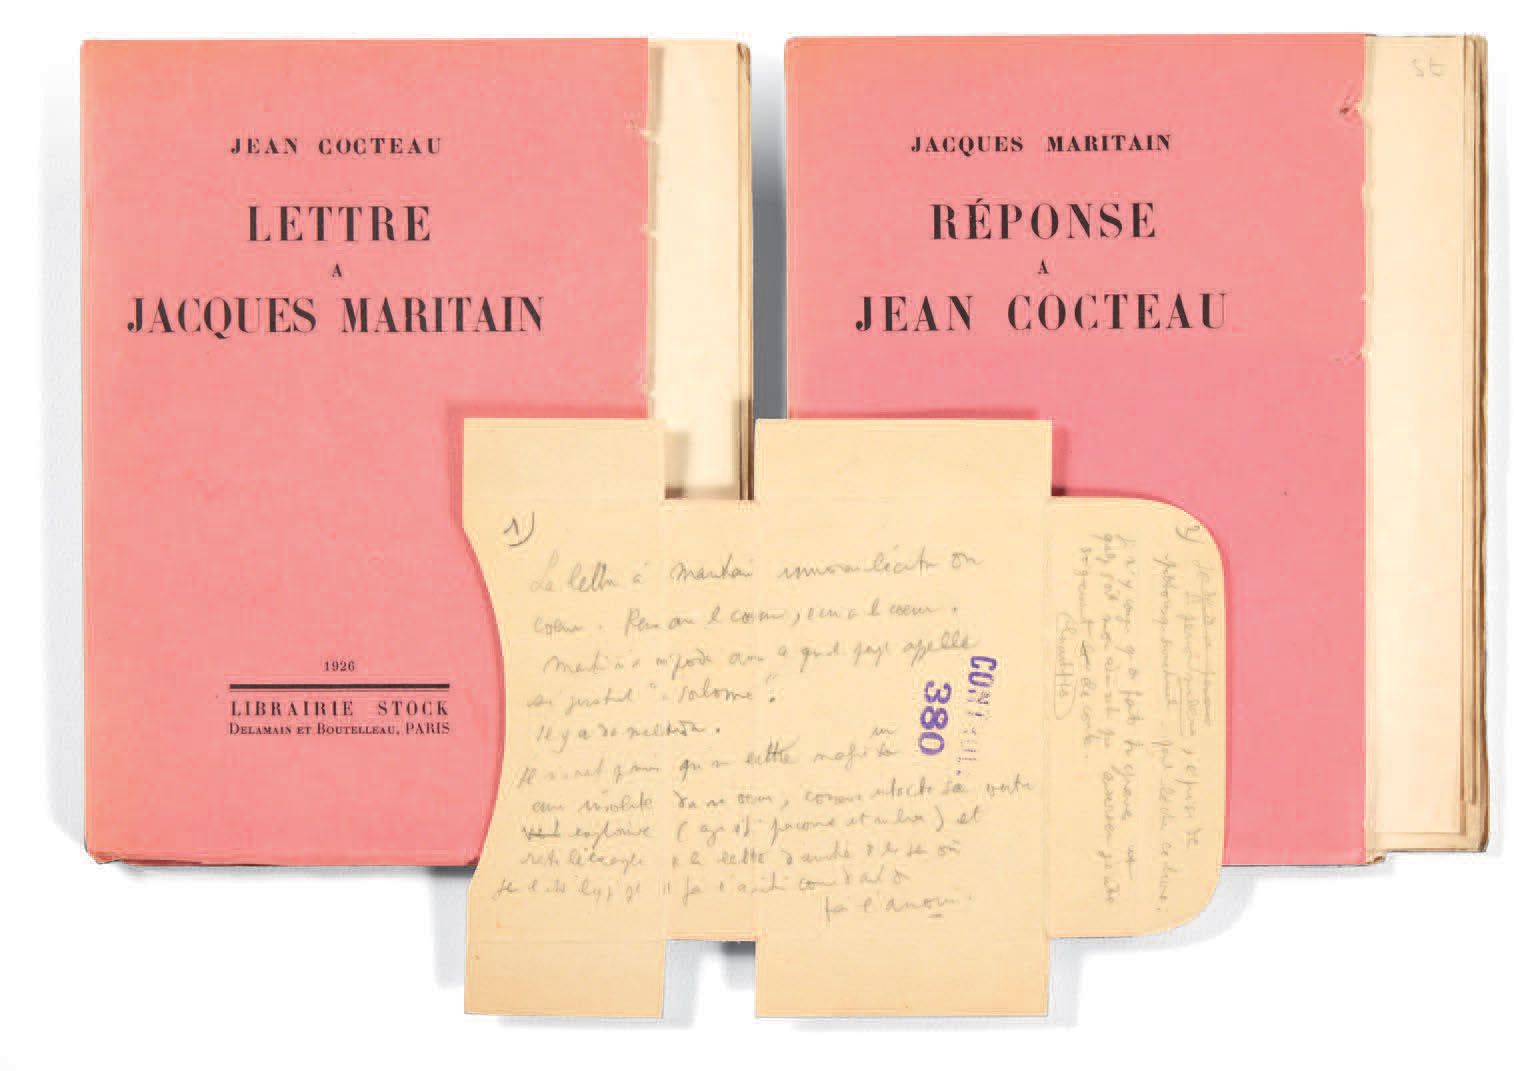 COCTEAU, Jean & Jacques MARITAIN. Letter to Jacques Maritain - Answer to Jean Co&hellip;